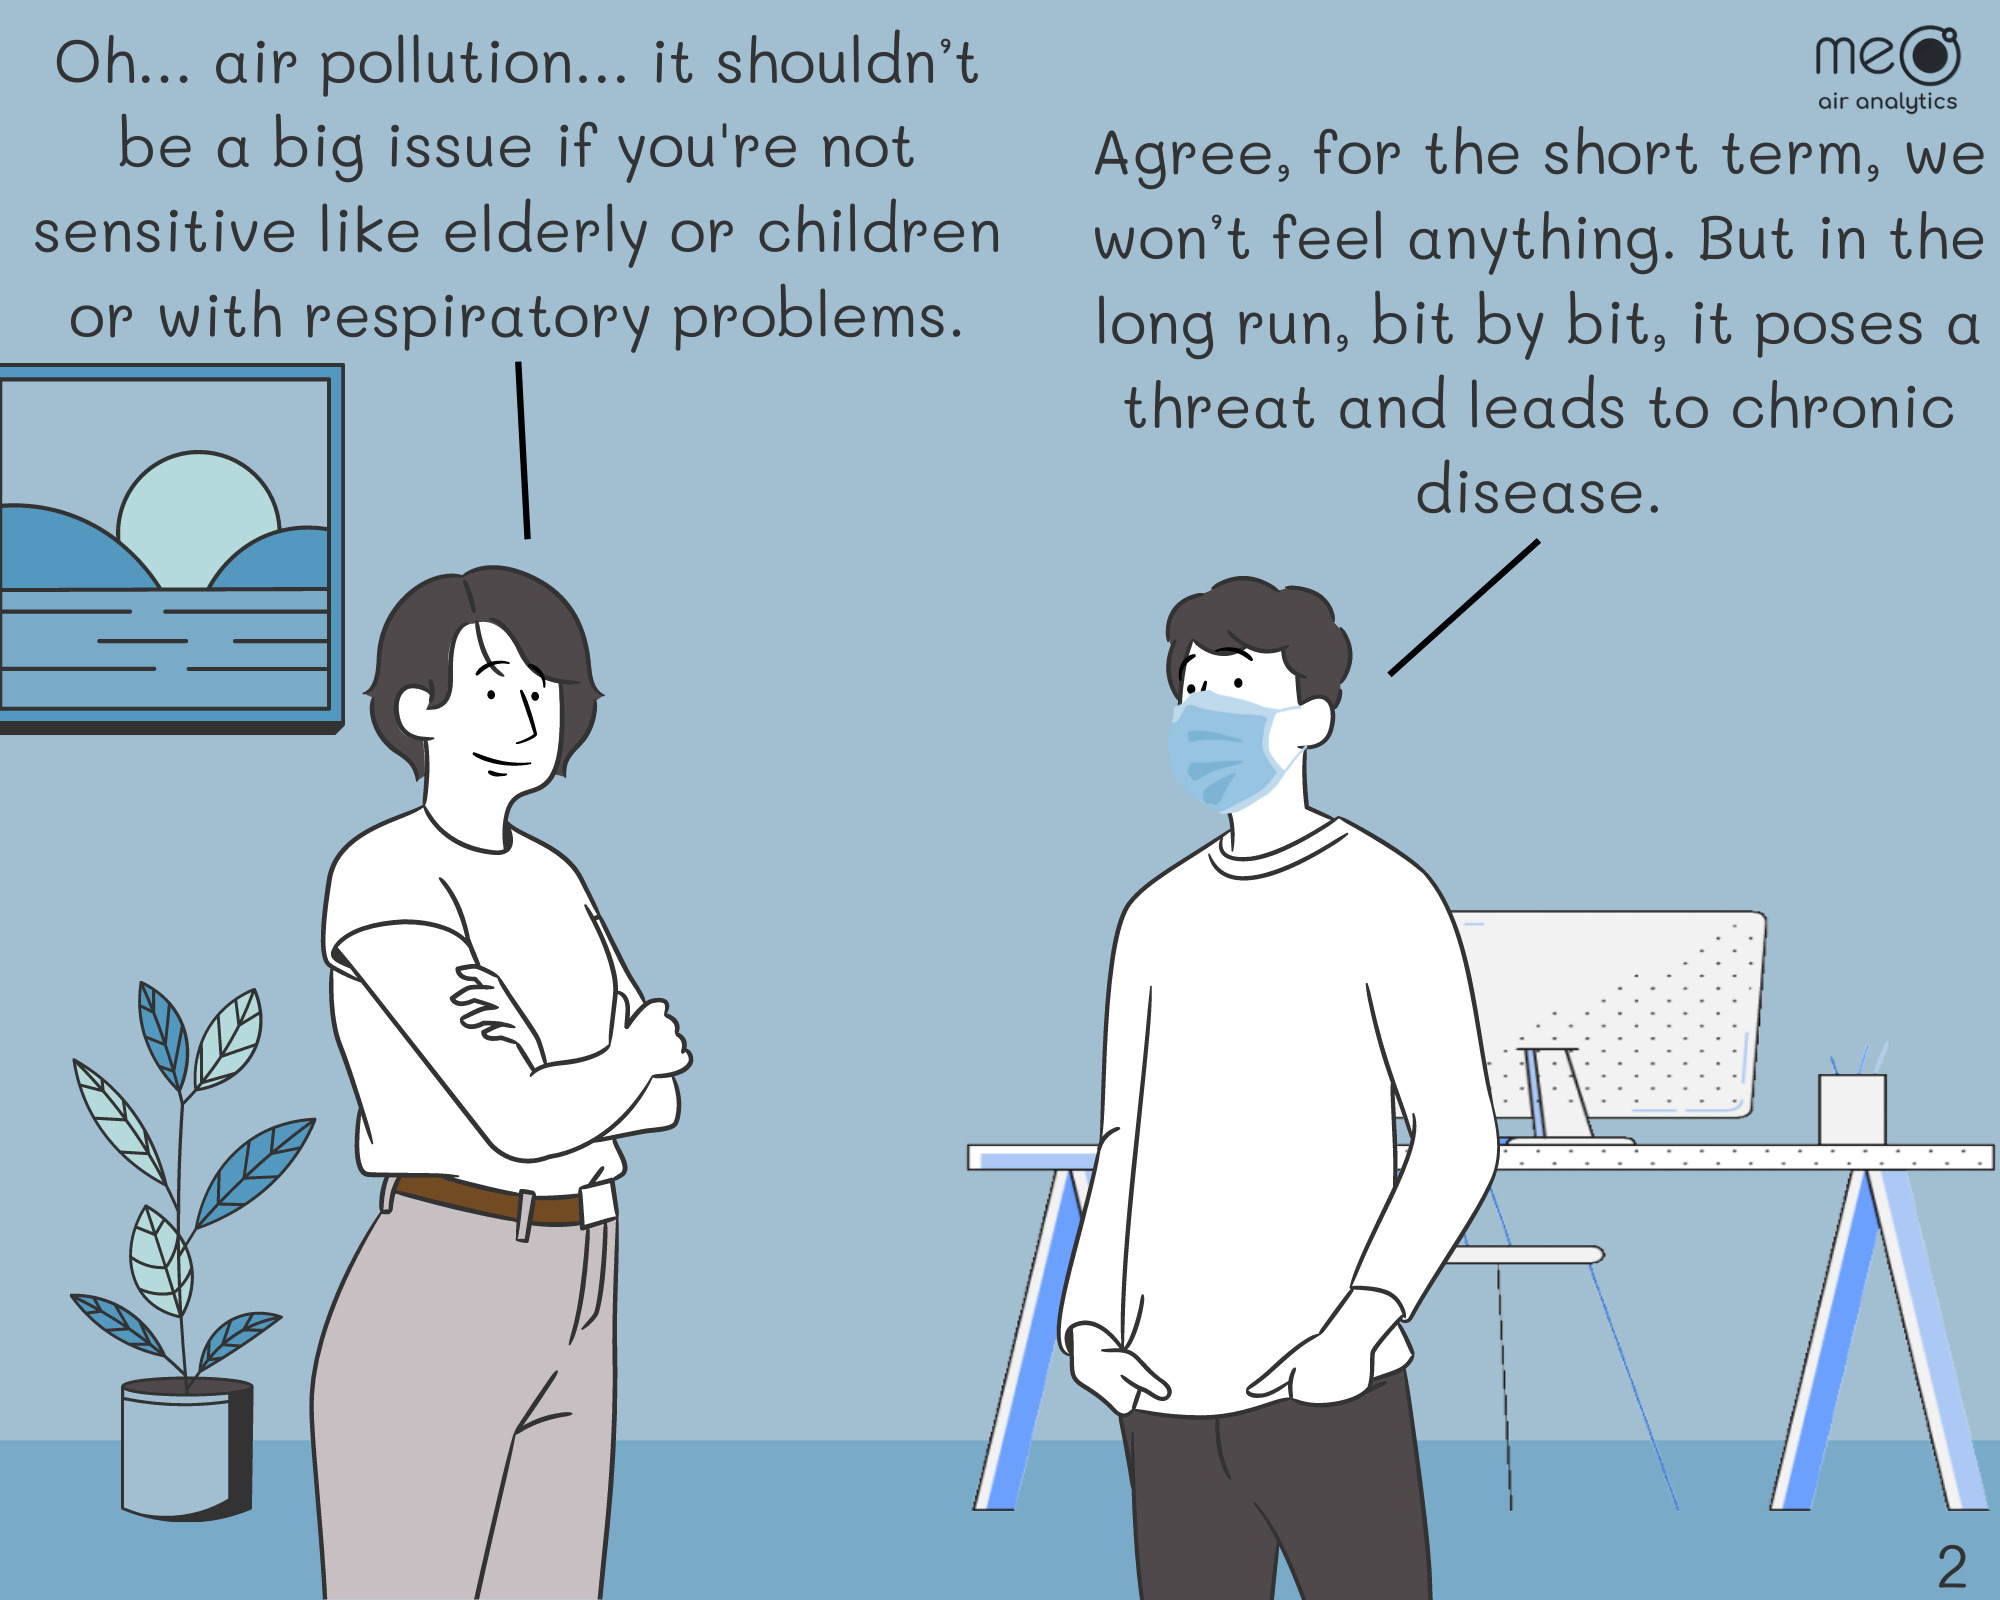 Joyce: Oh… air pollution… it shouldn’t be a big issue if you're not sensitive like elderly or children or with respiratory problems. Tim: Agree, for the short term, we won’t feel anything. But in the long run, bit by bit, it poses a threat and leads to chronic disease.